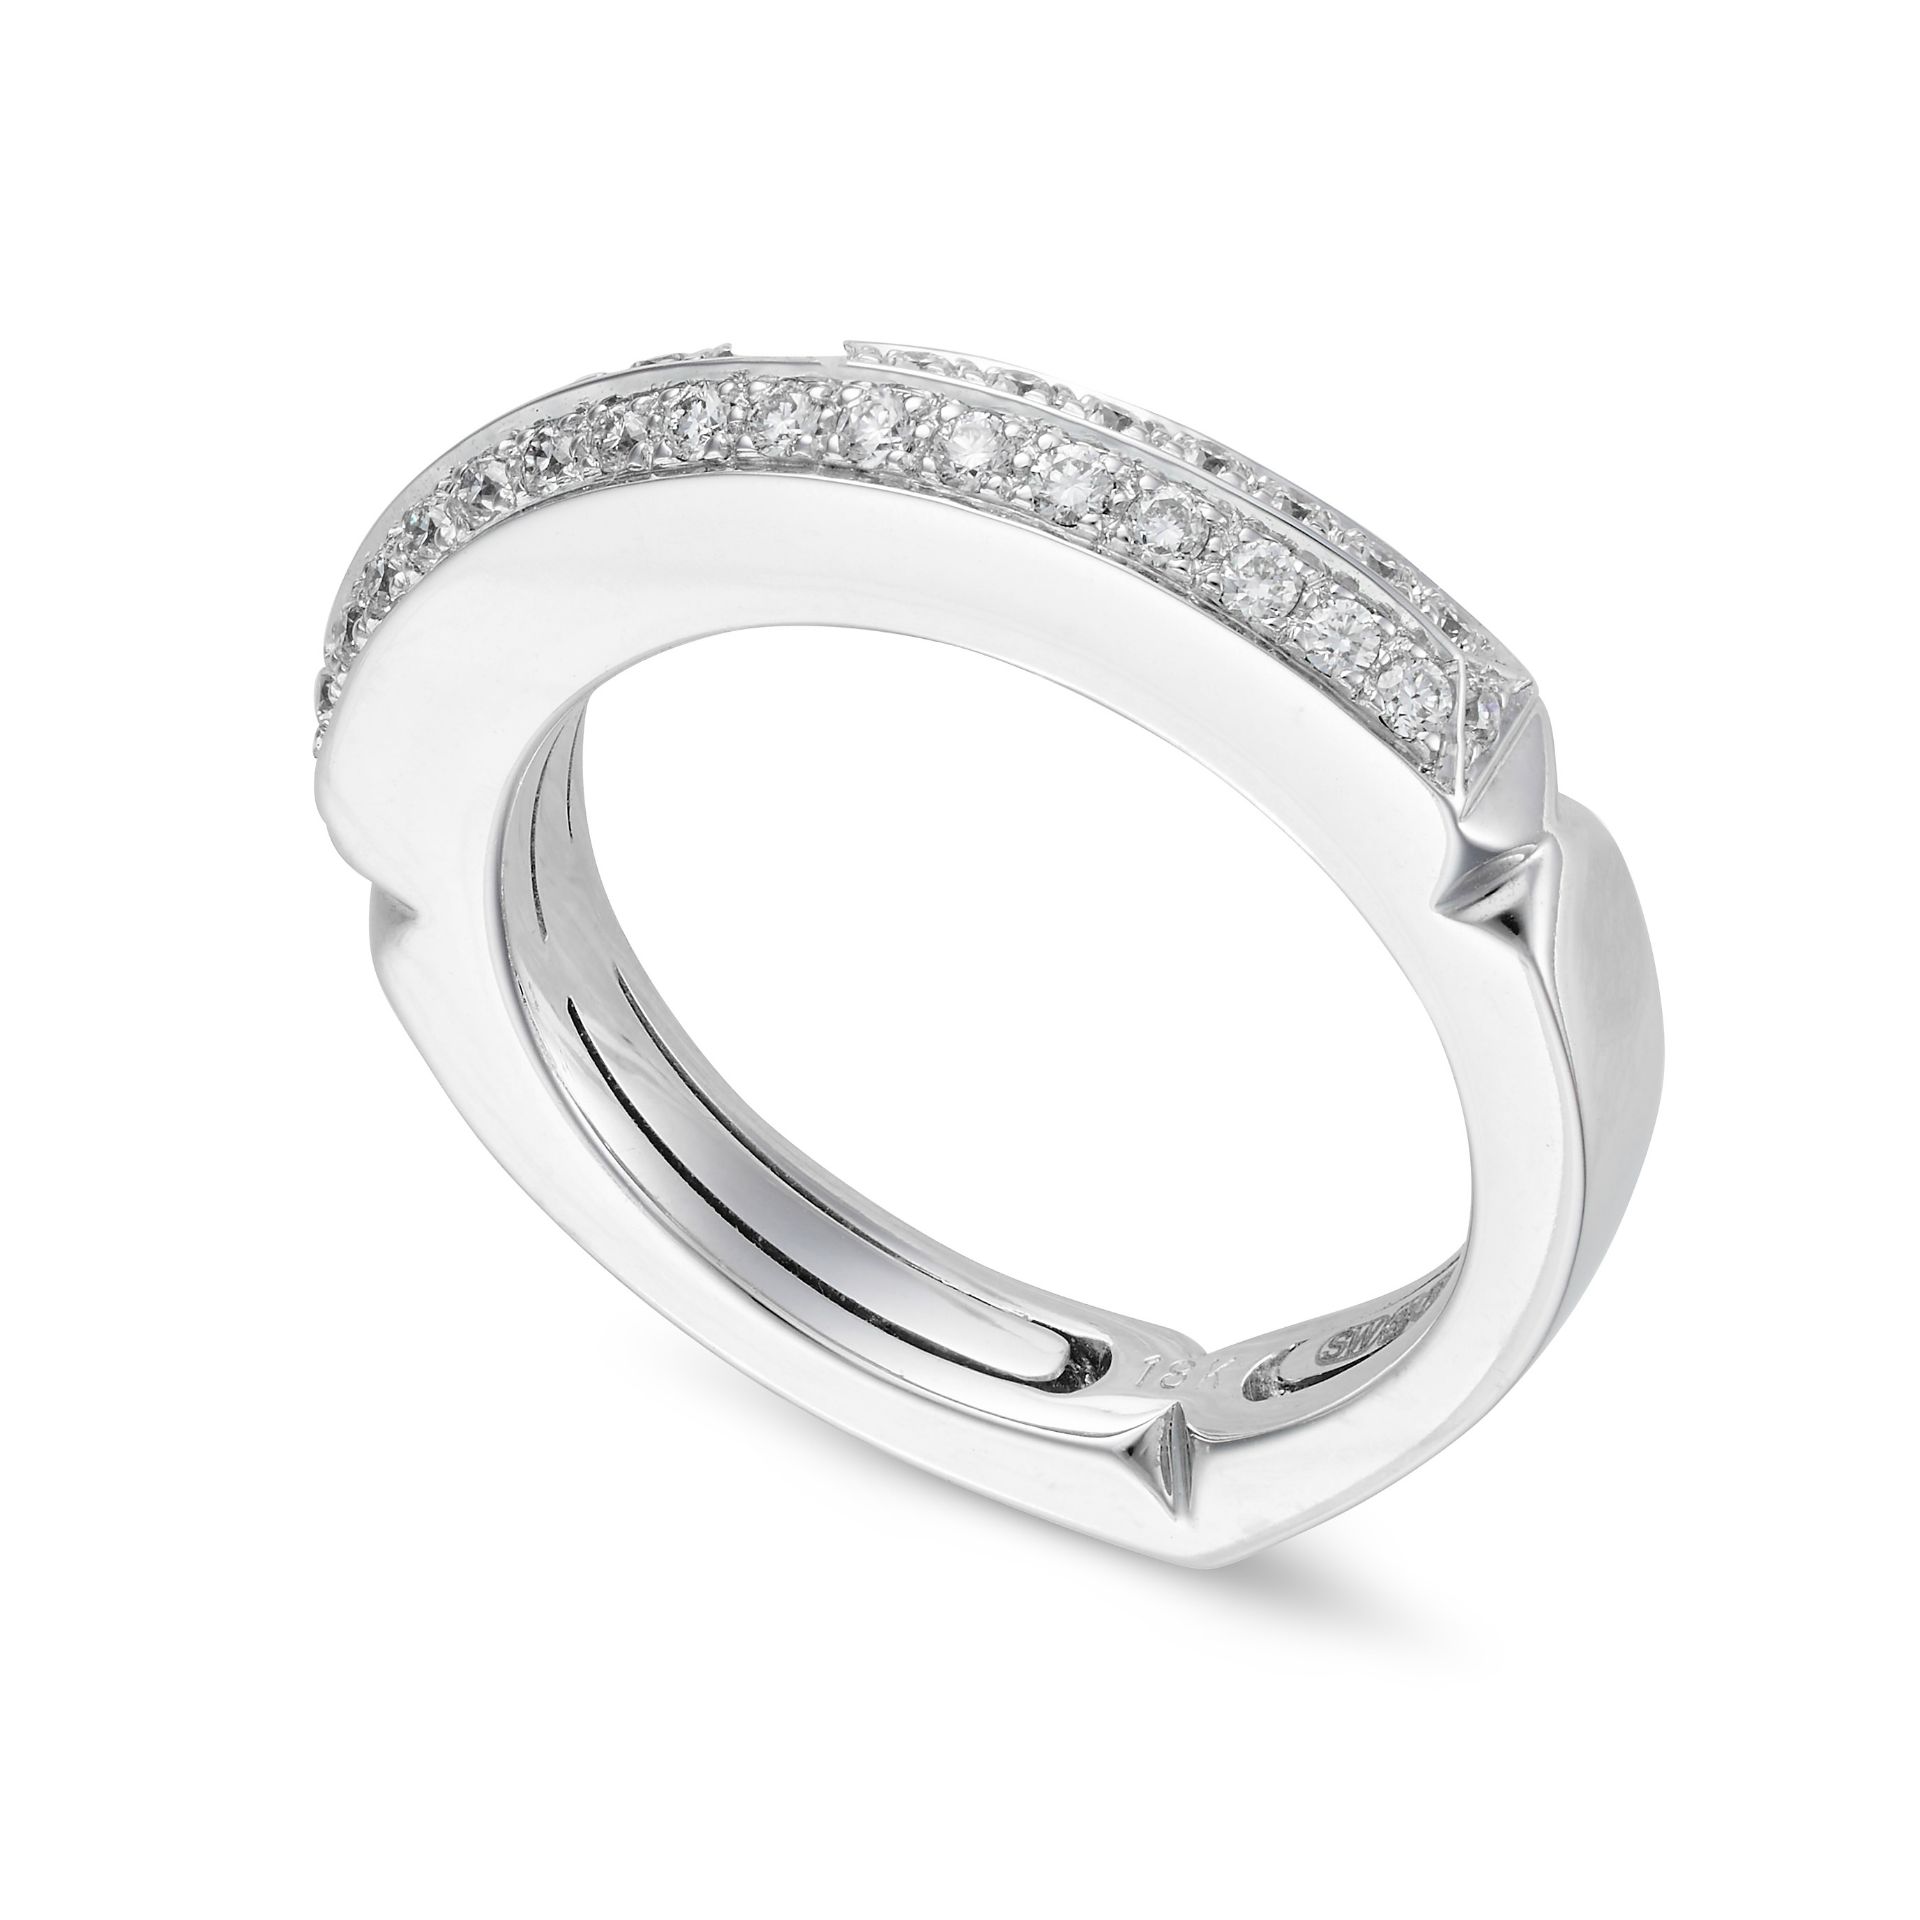 STEPHEN WEBSTER, A DIAMOND HALF ETERNITY RING in 18ct white gold, the stylised band pave set with... - Image 2 of 2